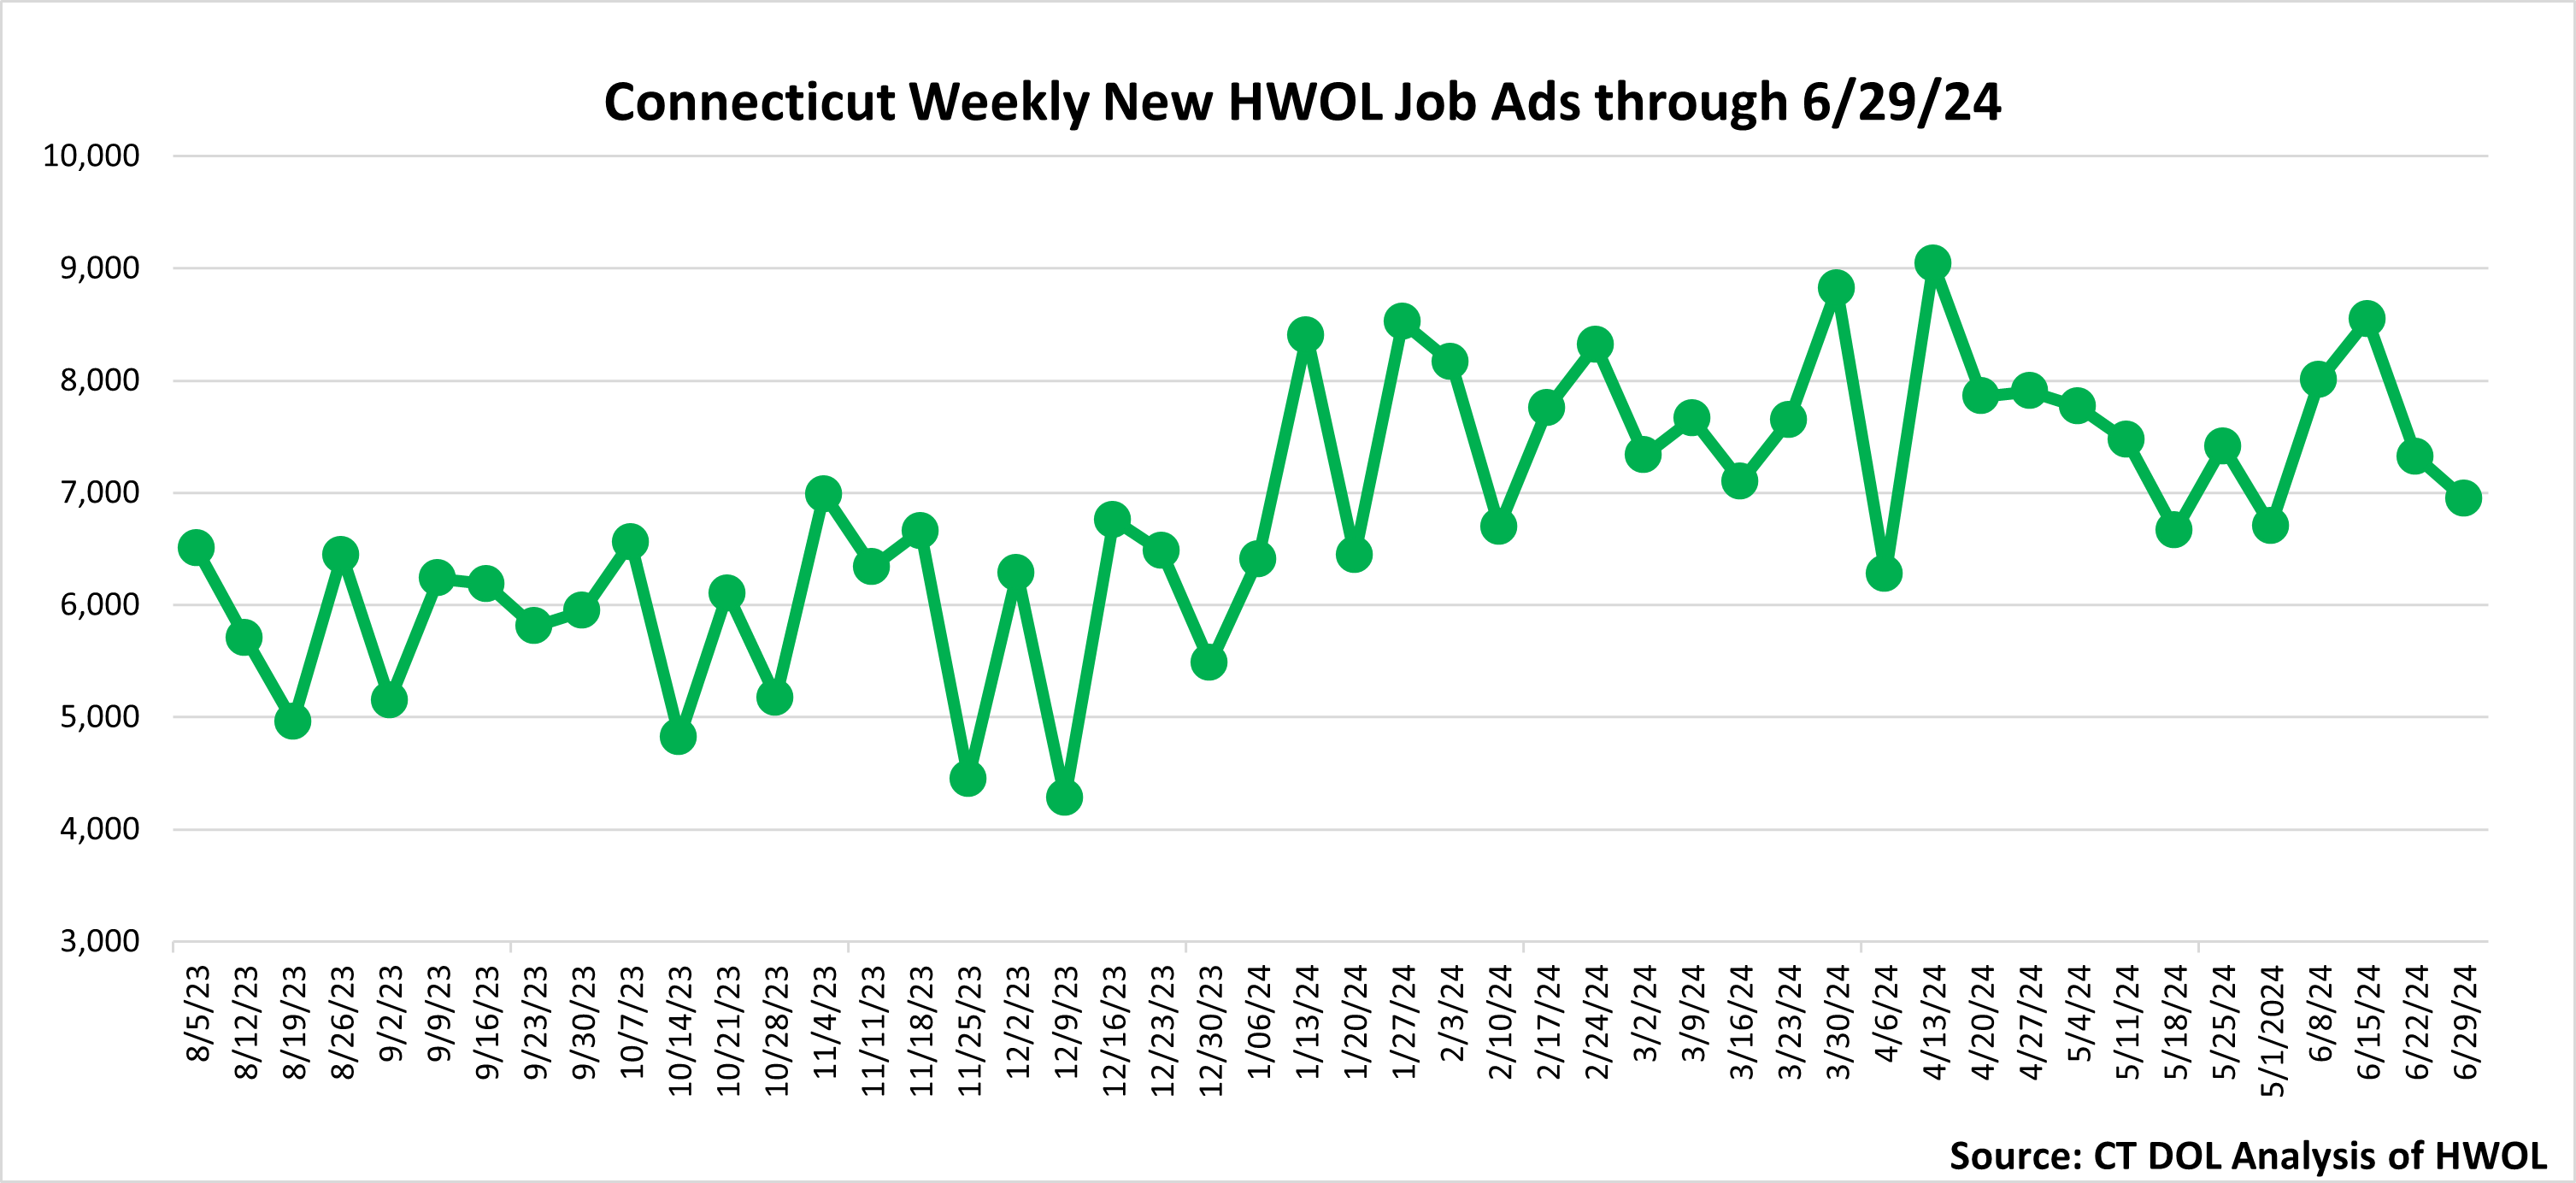 Connecticut Weekly Statewide New HWOL Job Ads through June 29th 2024